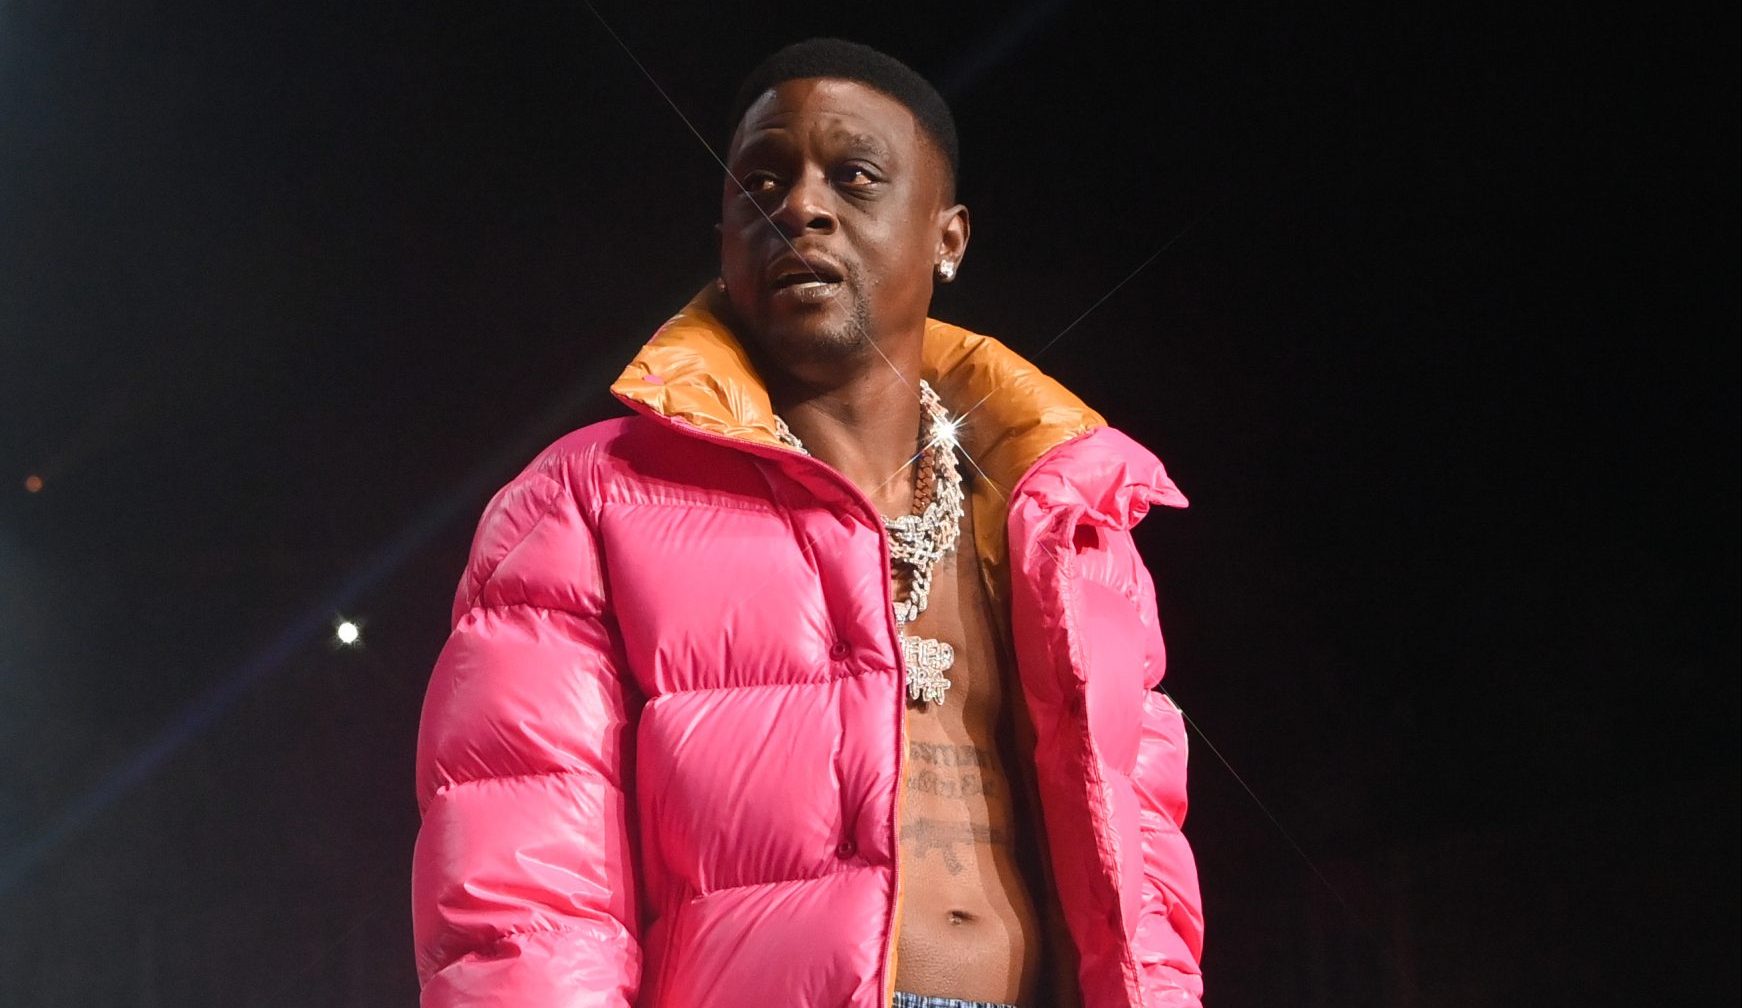 Boosie shared his latest encounter with police after being pulled over and rapped his hit single 